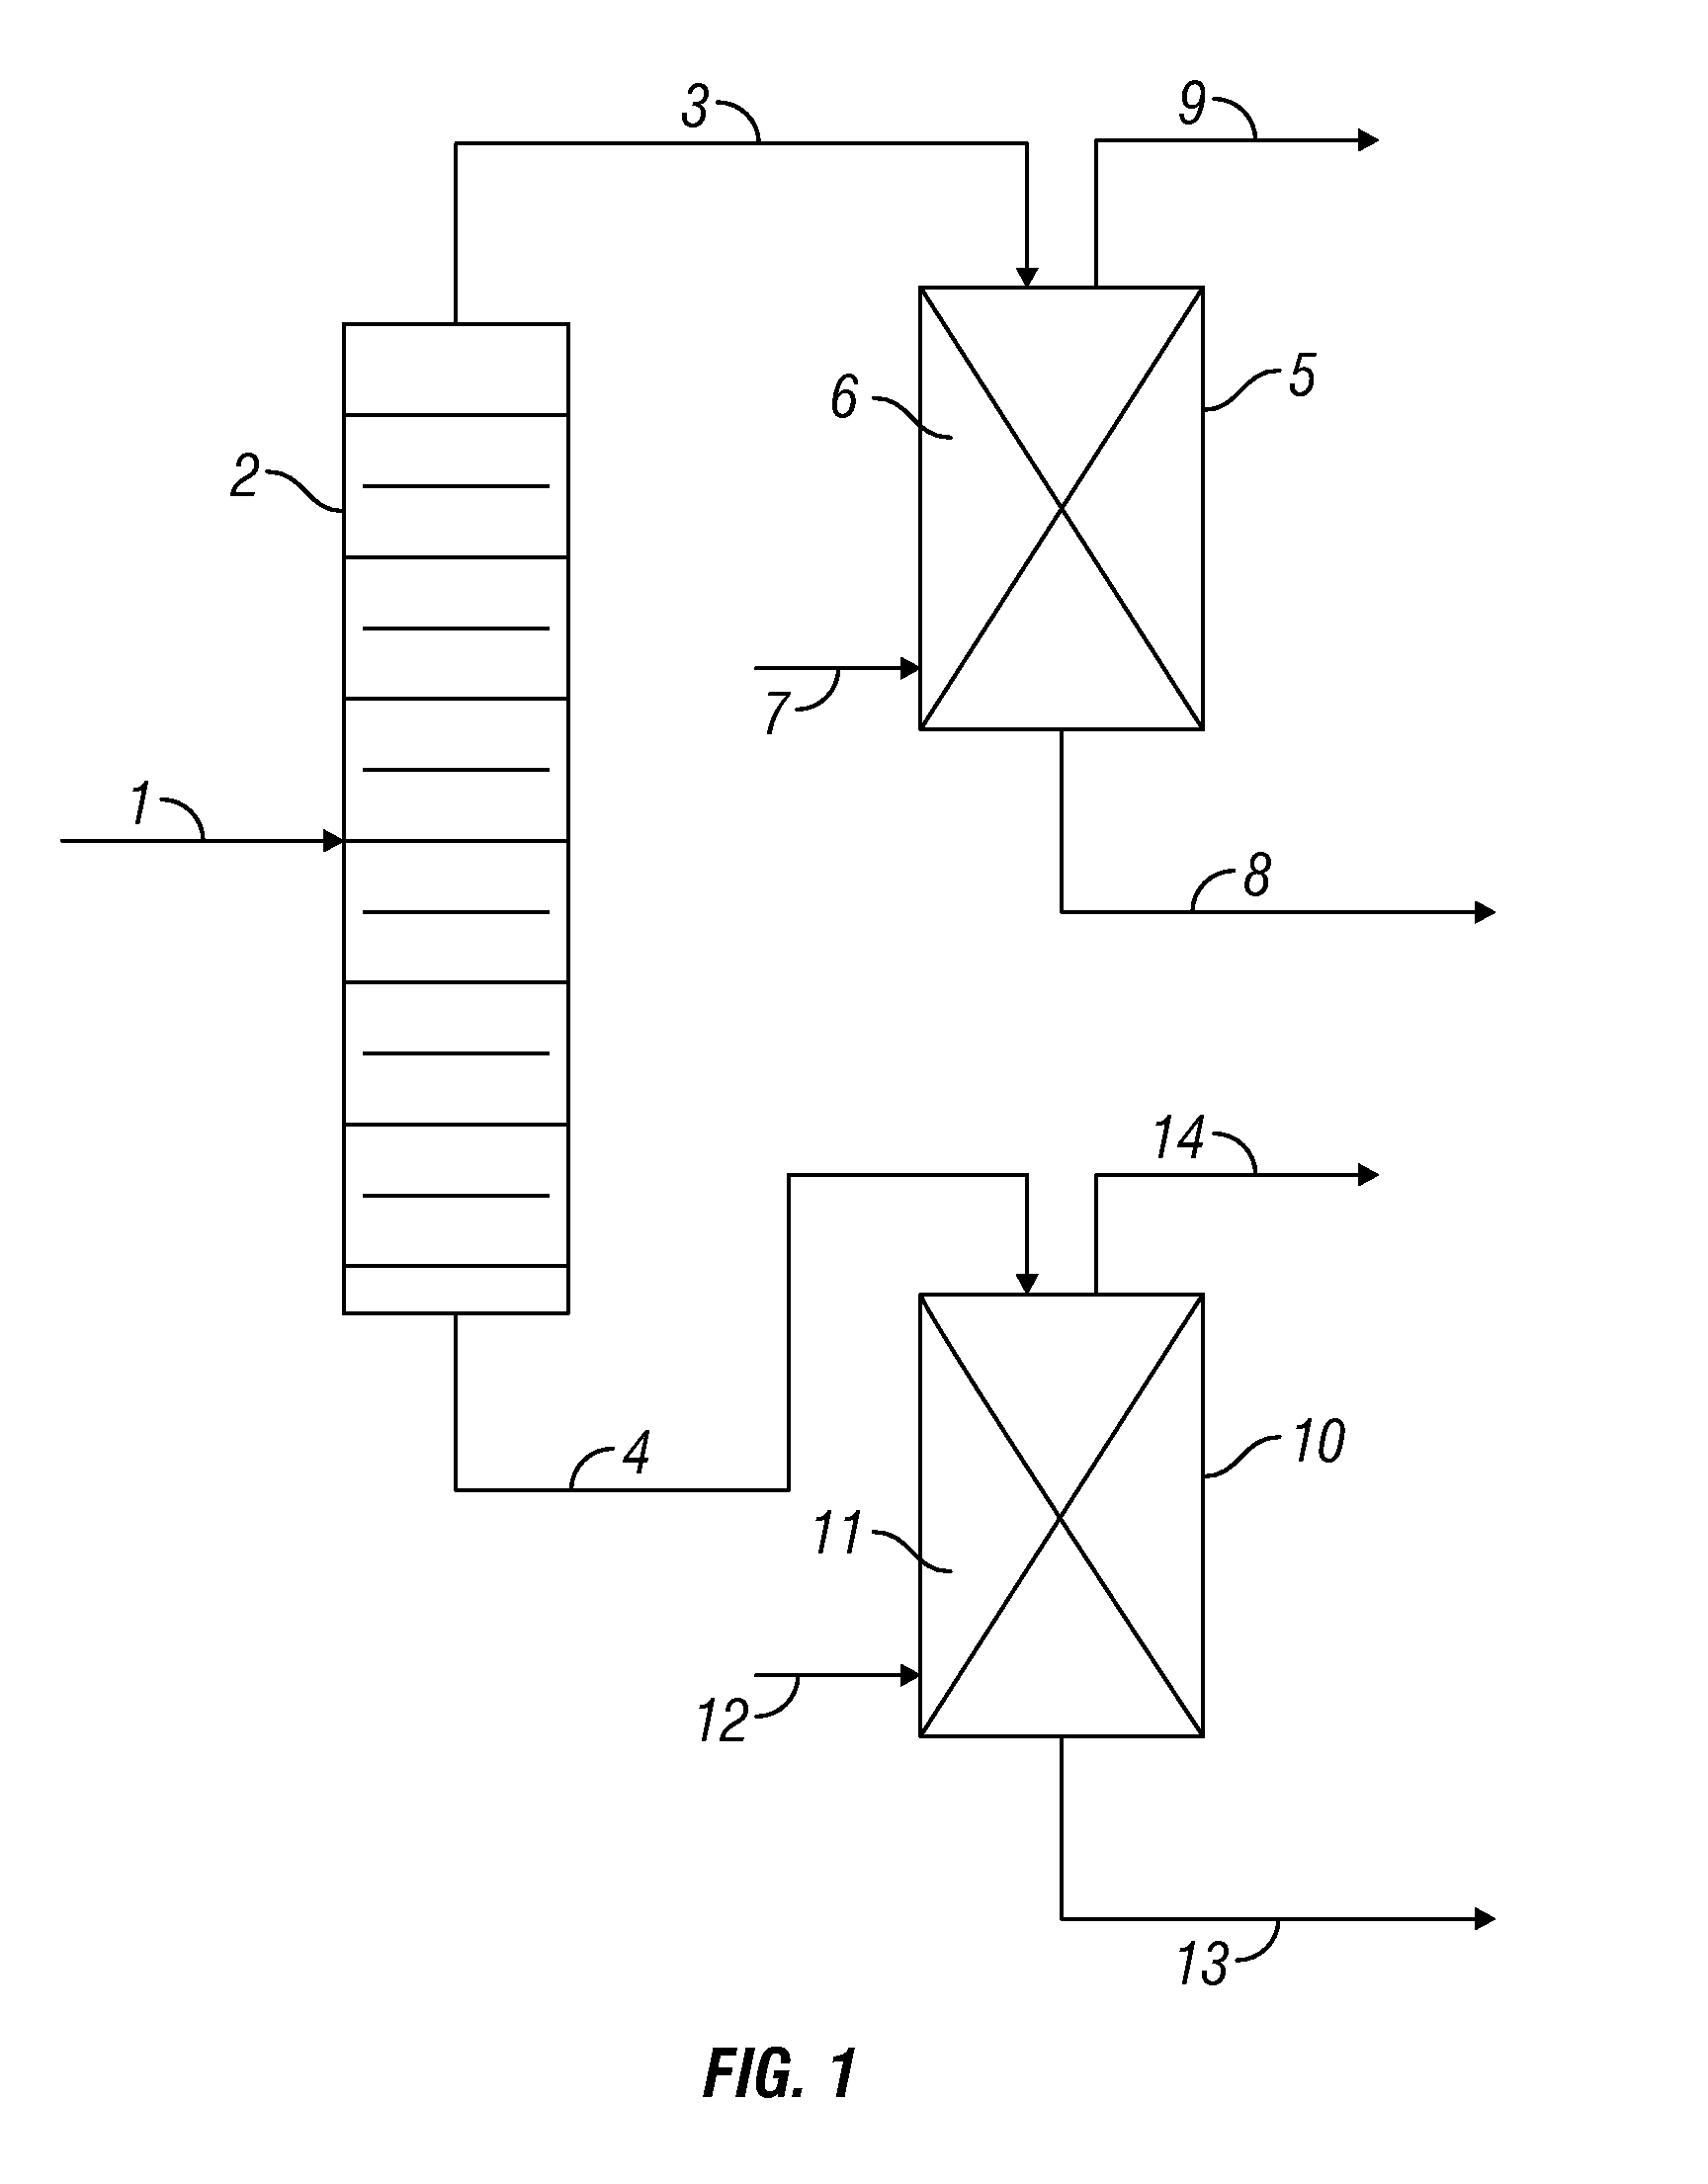 Process for the selective hydrodesulfurization of a gasoline feedstock containing high levels of olefins